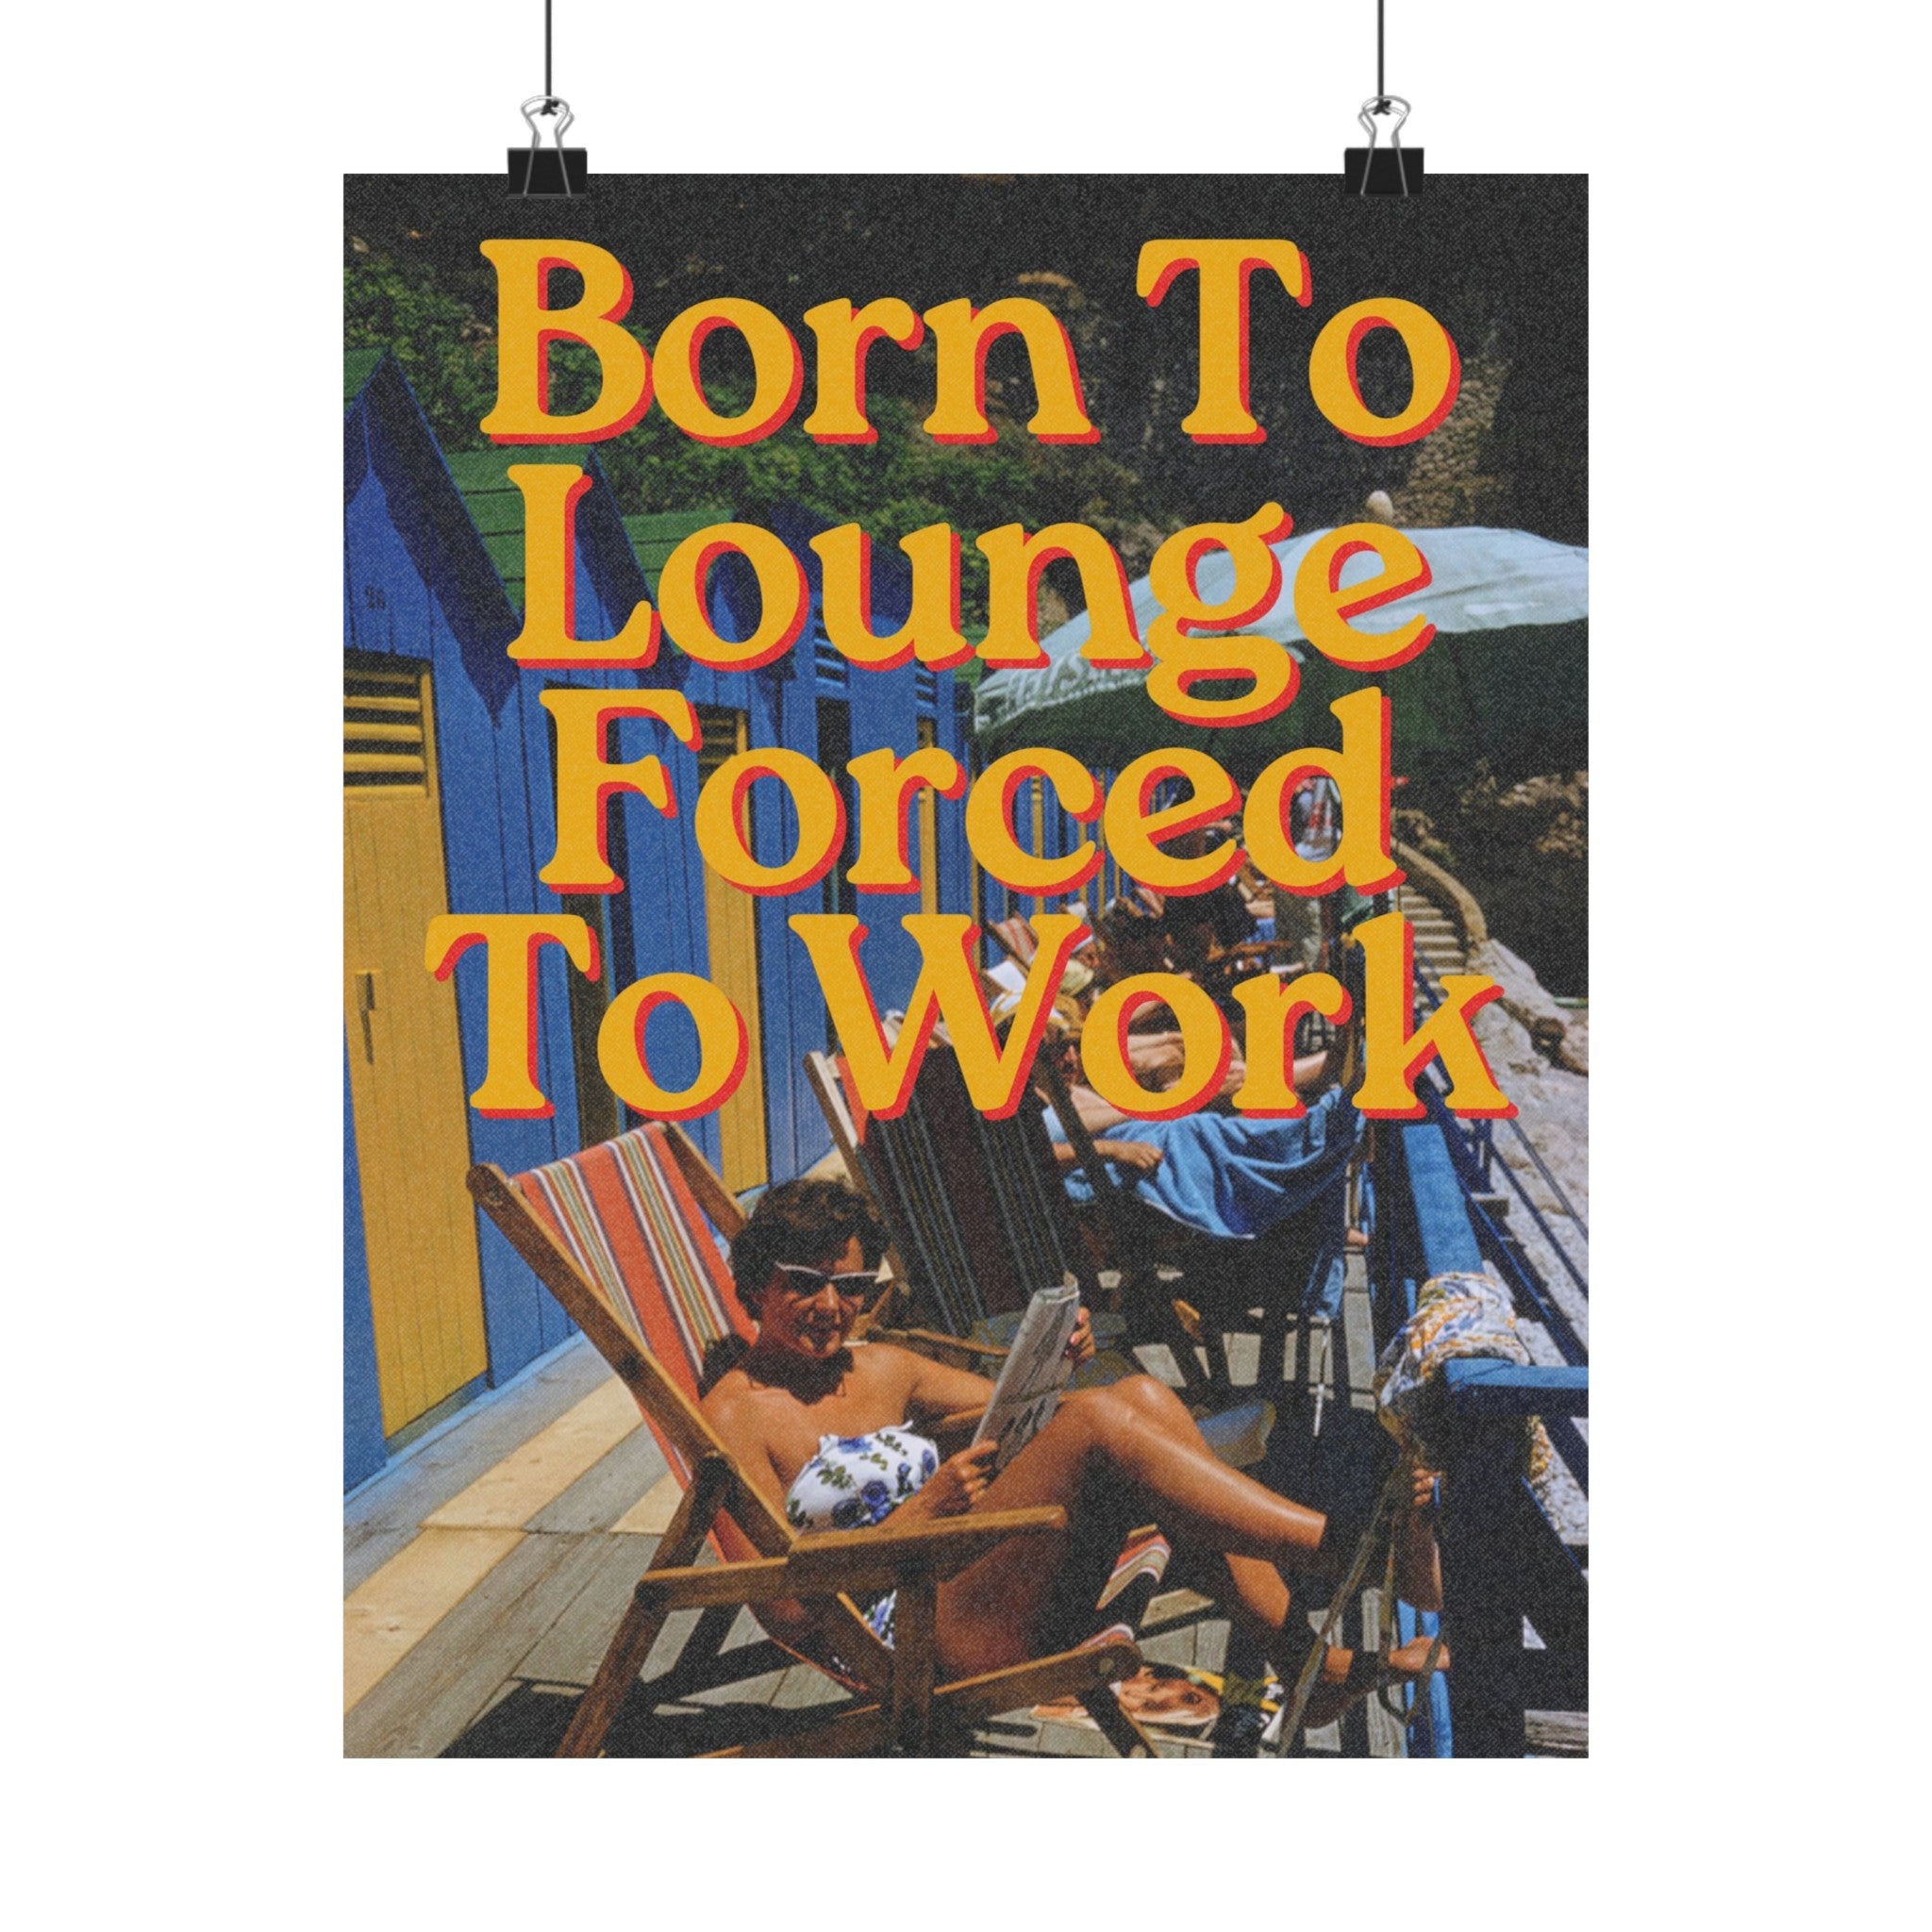 Born To Lounge, Forced to Work Physical Poster